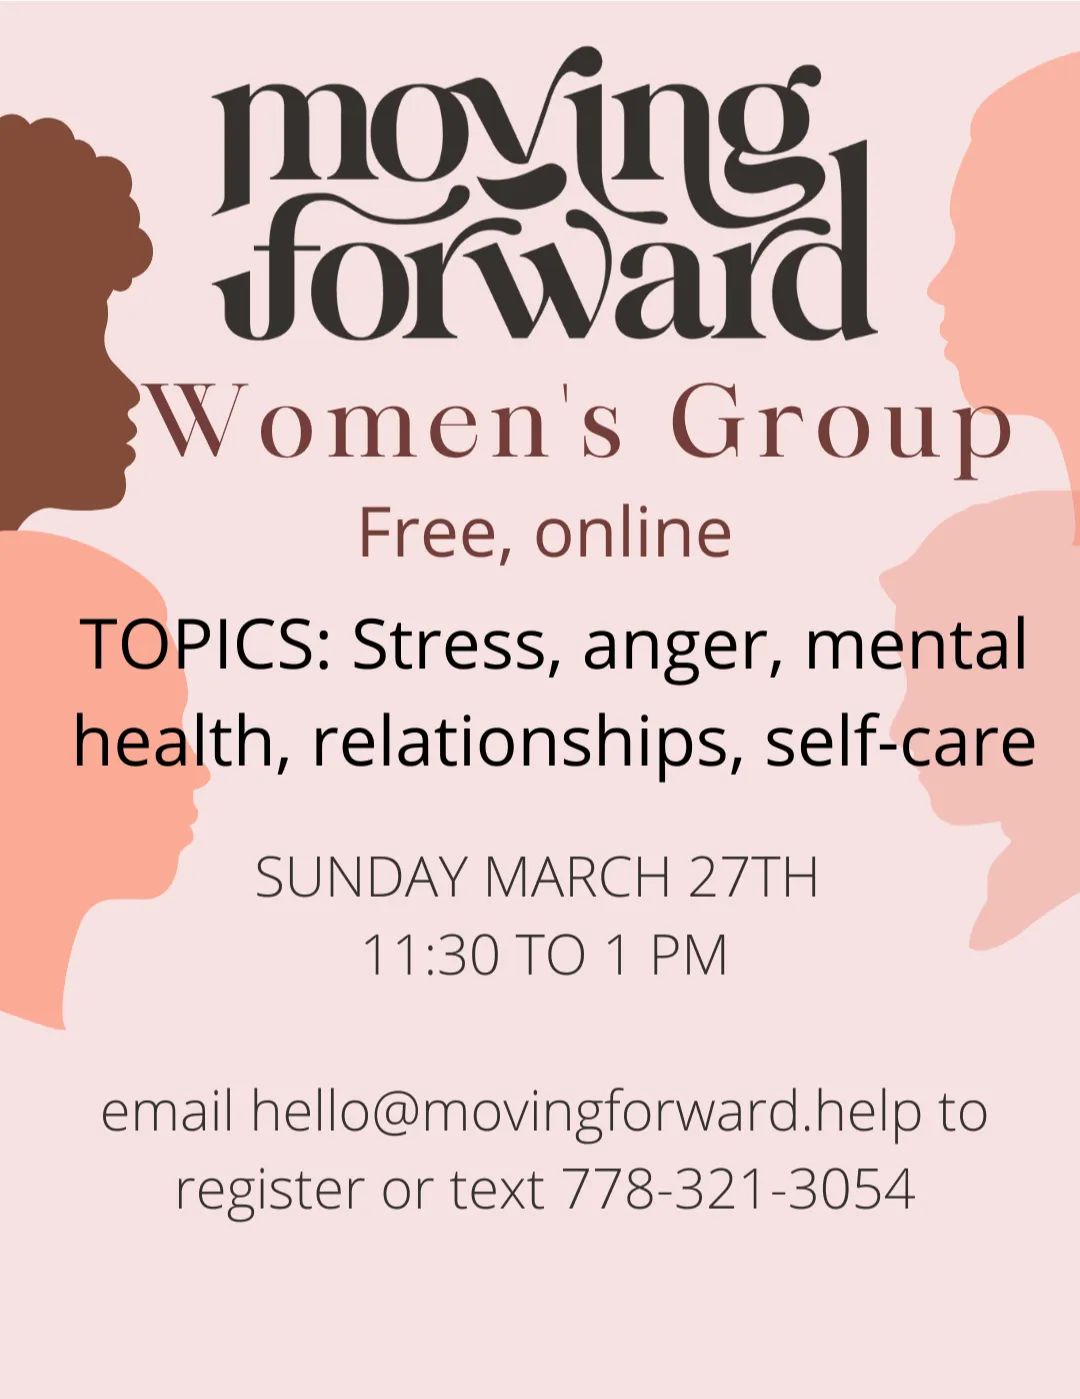 Free Course Helping Women Deal with Stress, Anger, Mental Health Starts This Weekend!